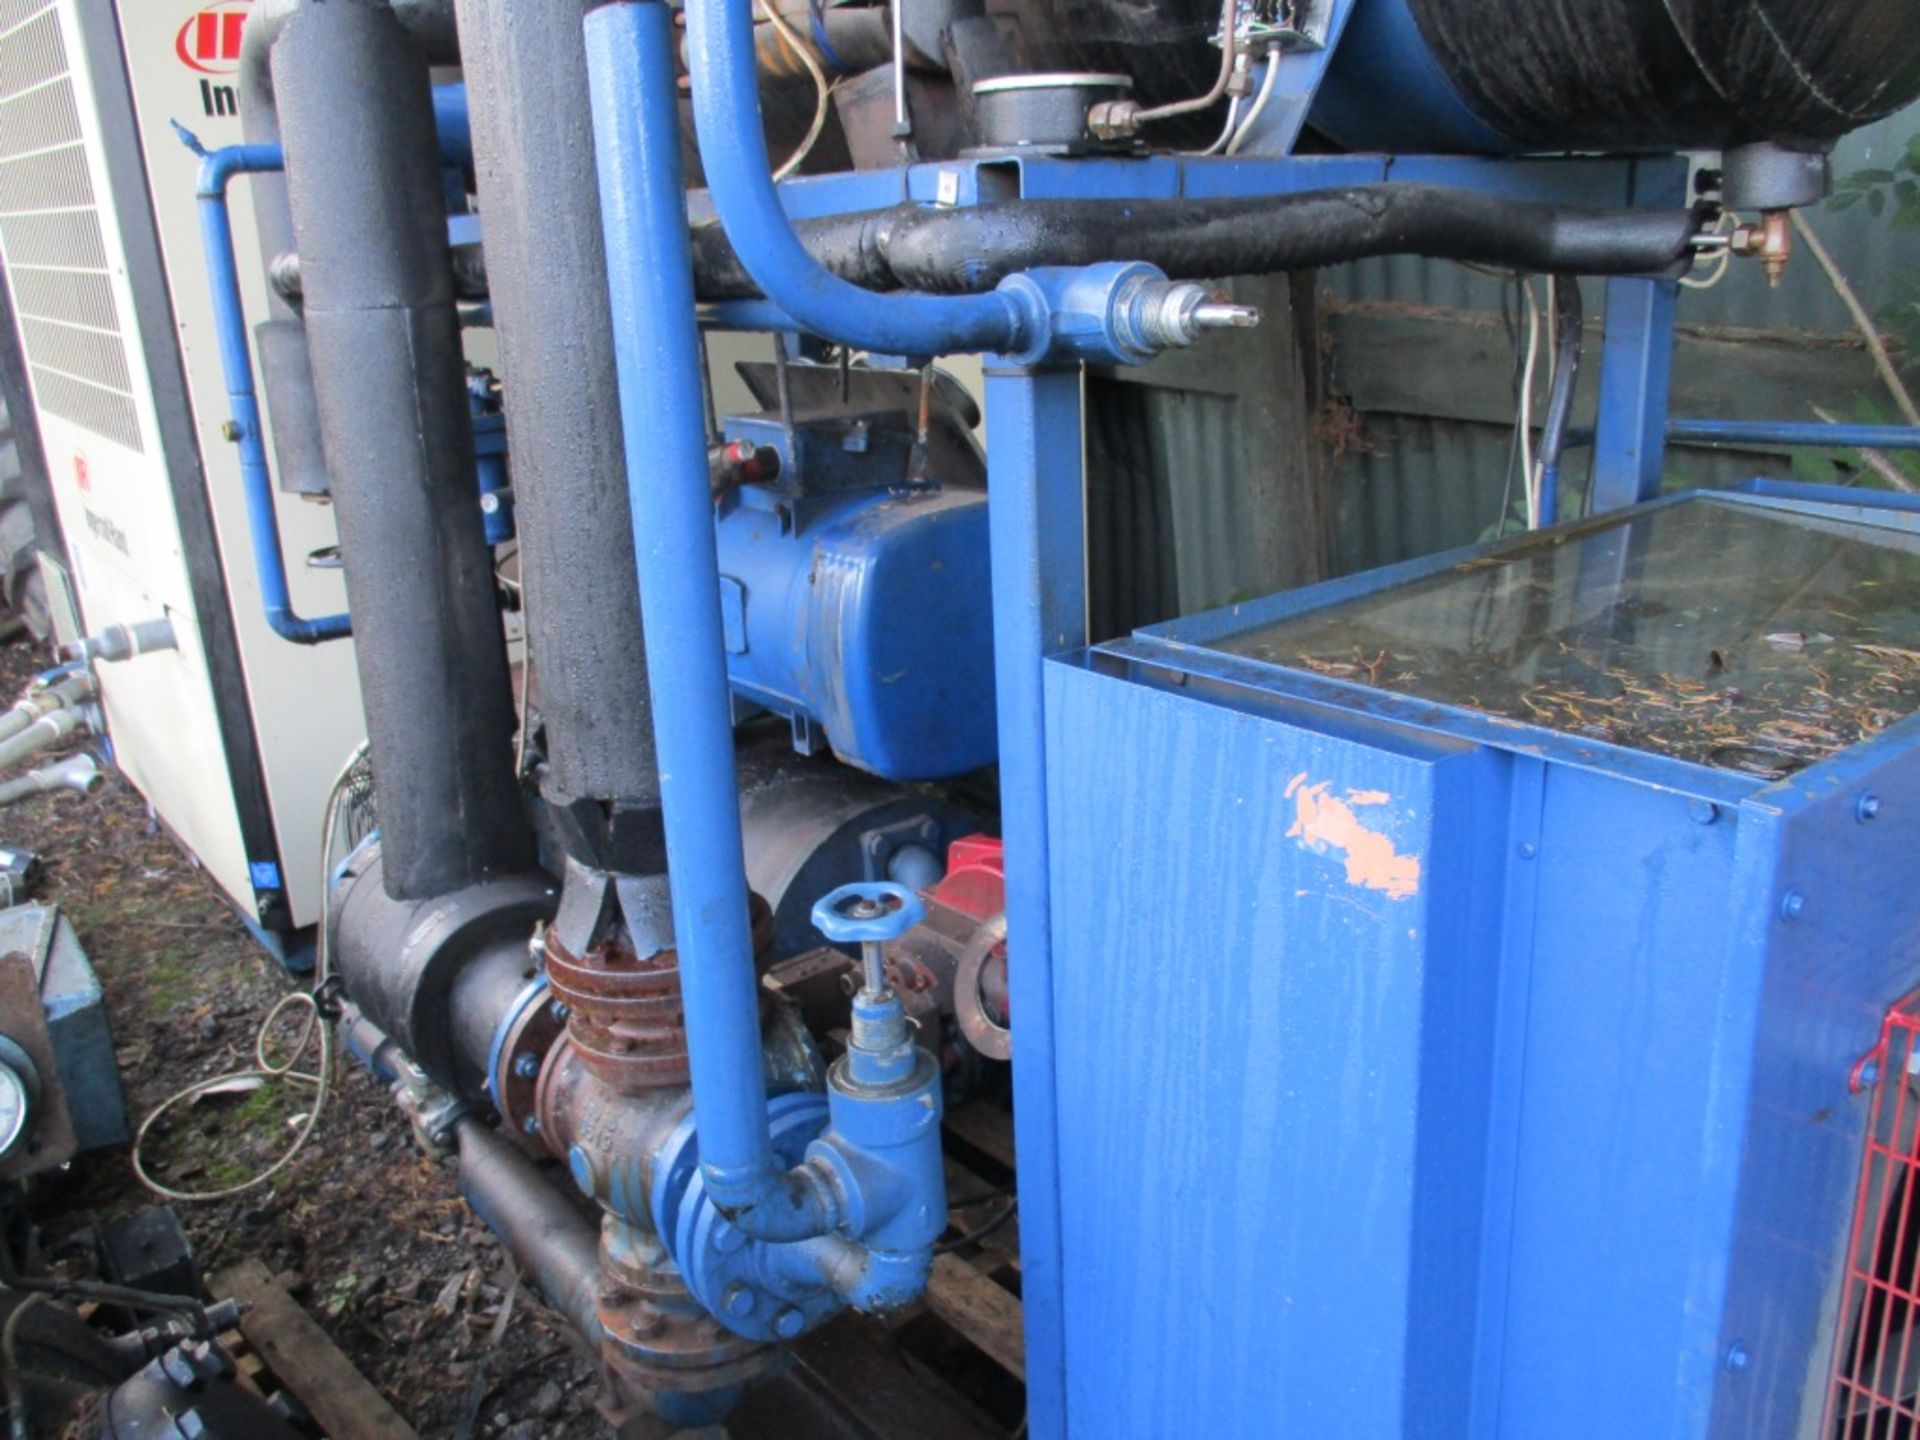 2 part industrial cooling system ex cold store - Image 4 of 5